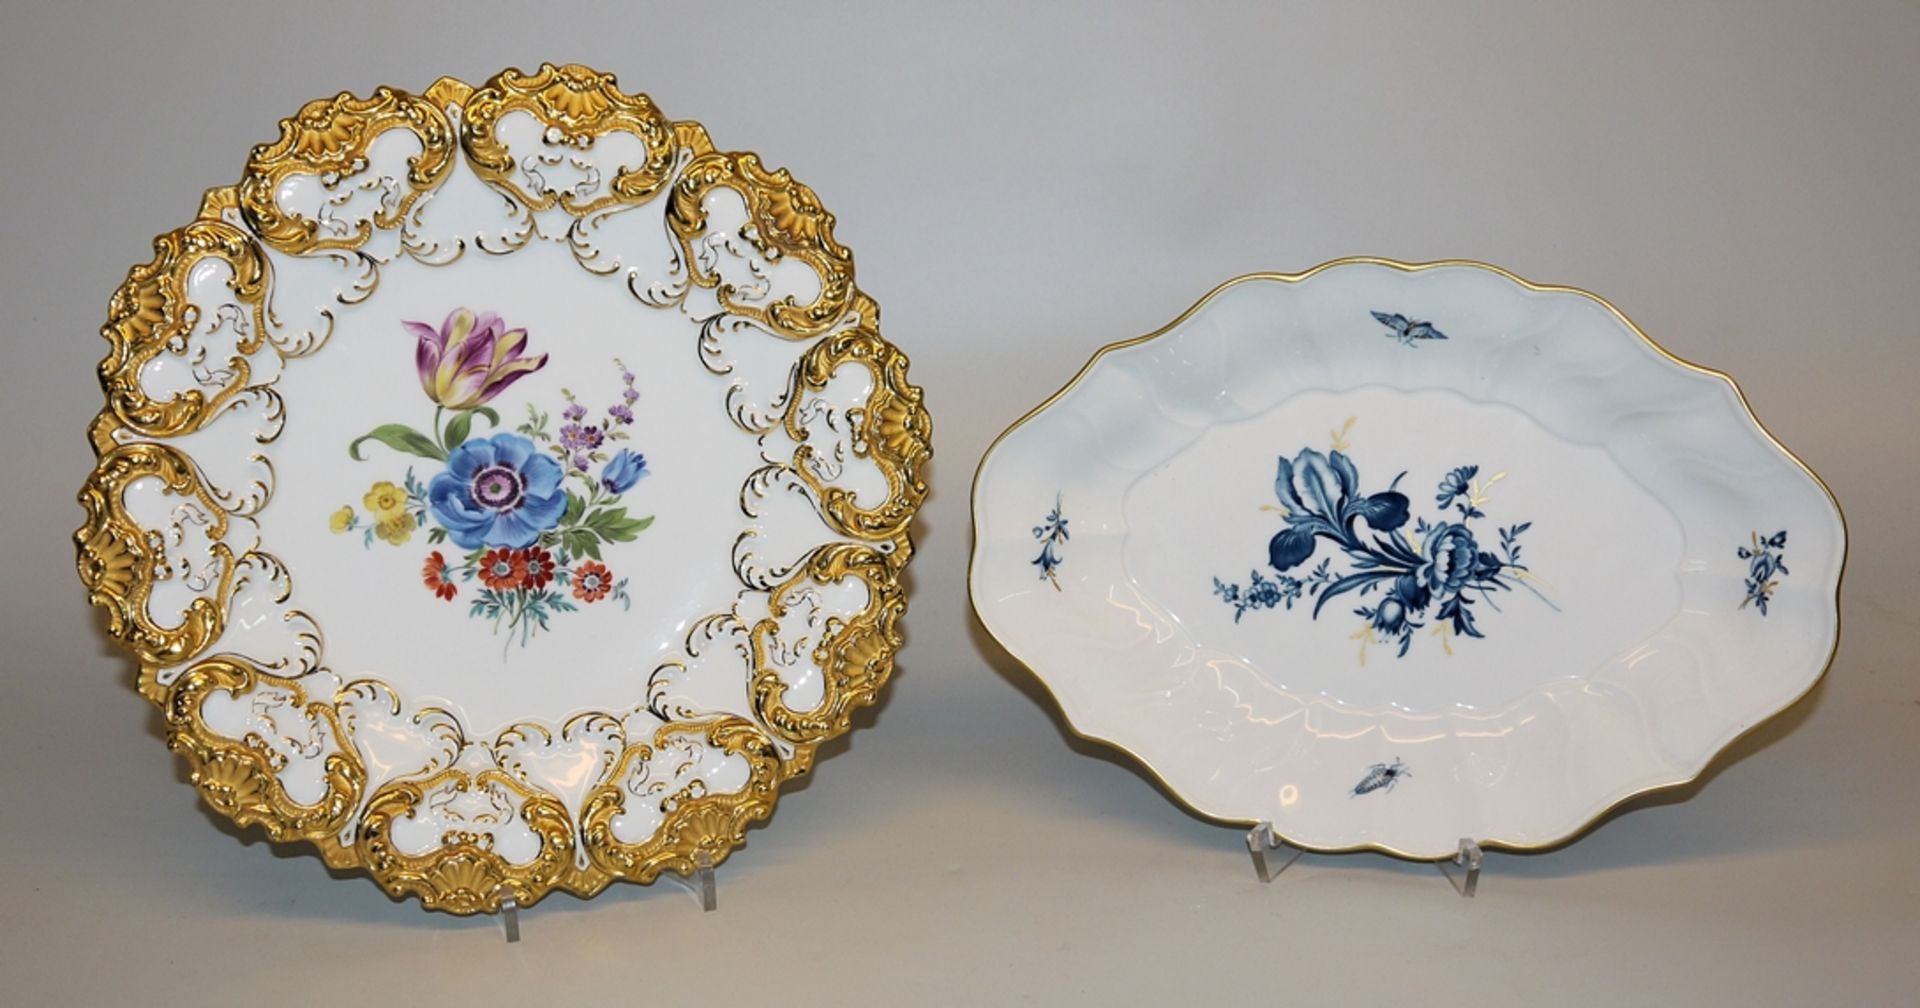 Showpiece plate and bowl, Royal Meissen, 20th century